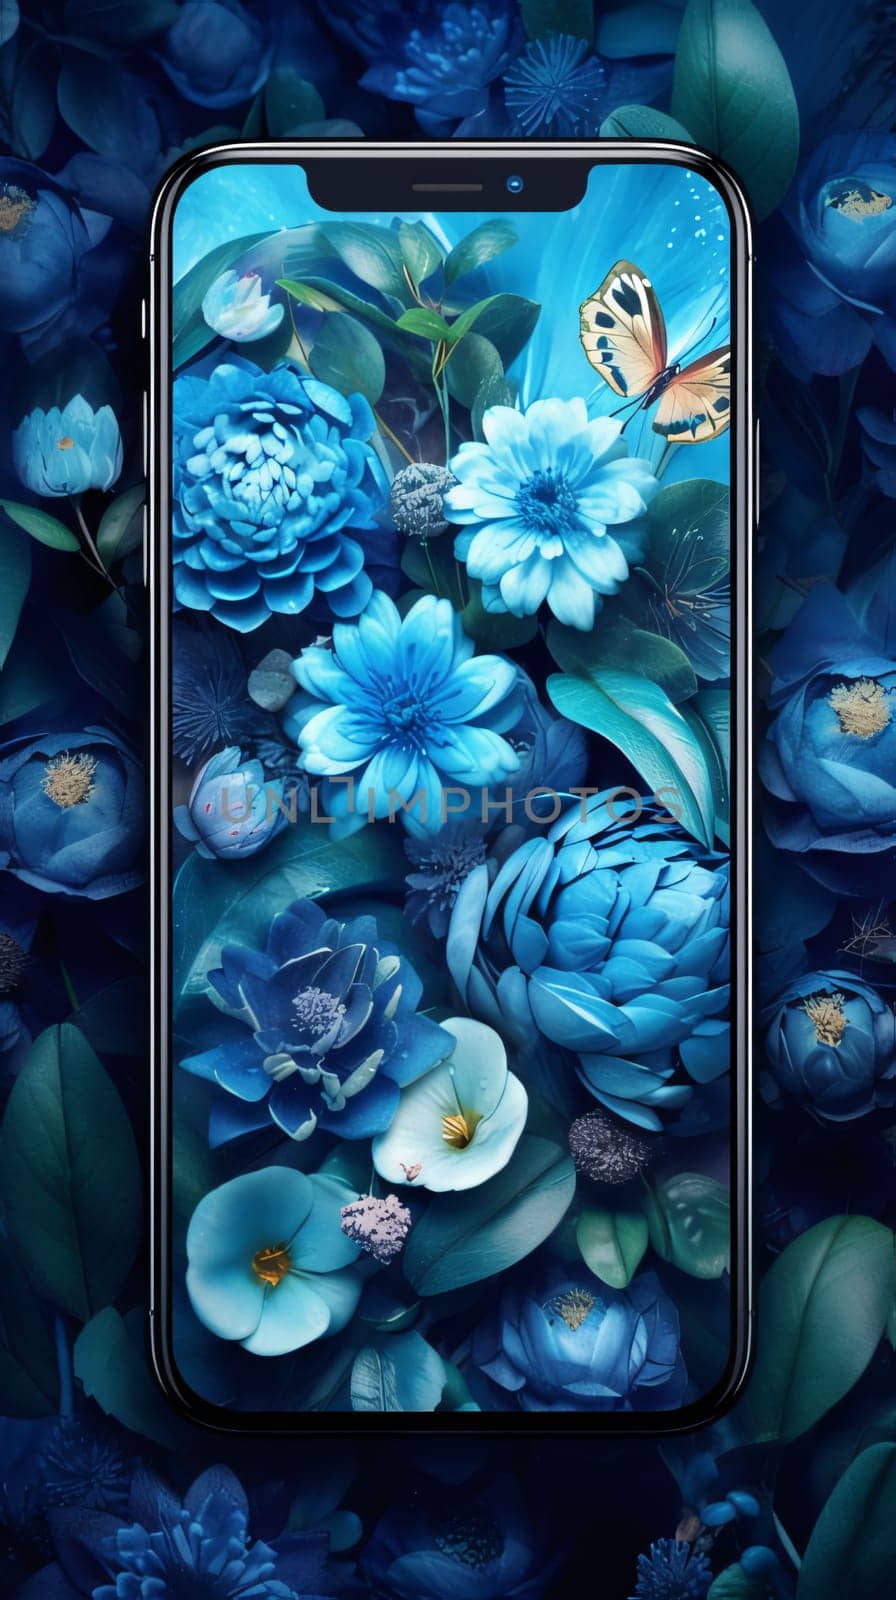 Smartphone screen: Mobile phone with blue flowers and butterflies on the screen. Floral background